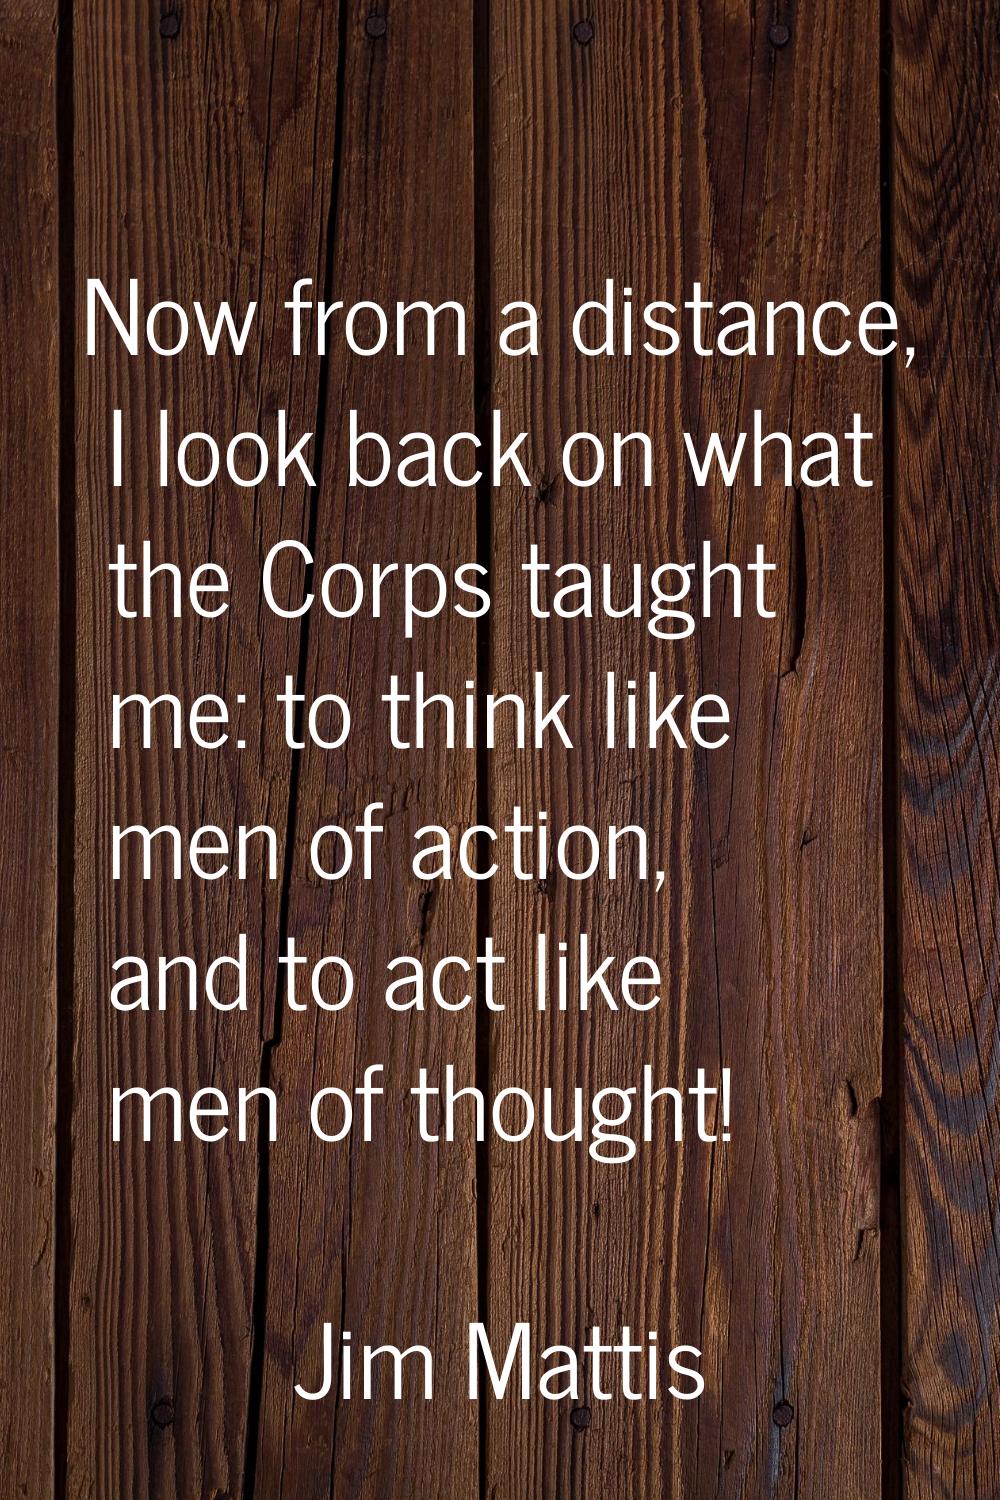 Now from a distance, I look back on what the Corps taught me: to think like men of action, and to a